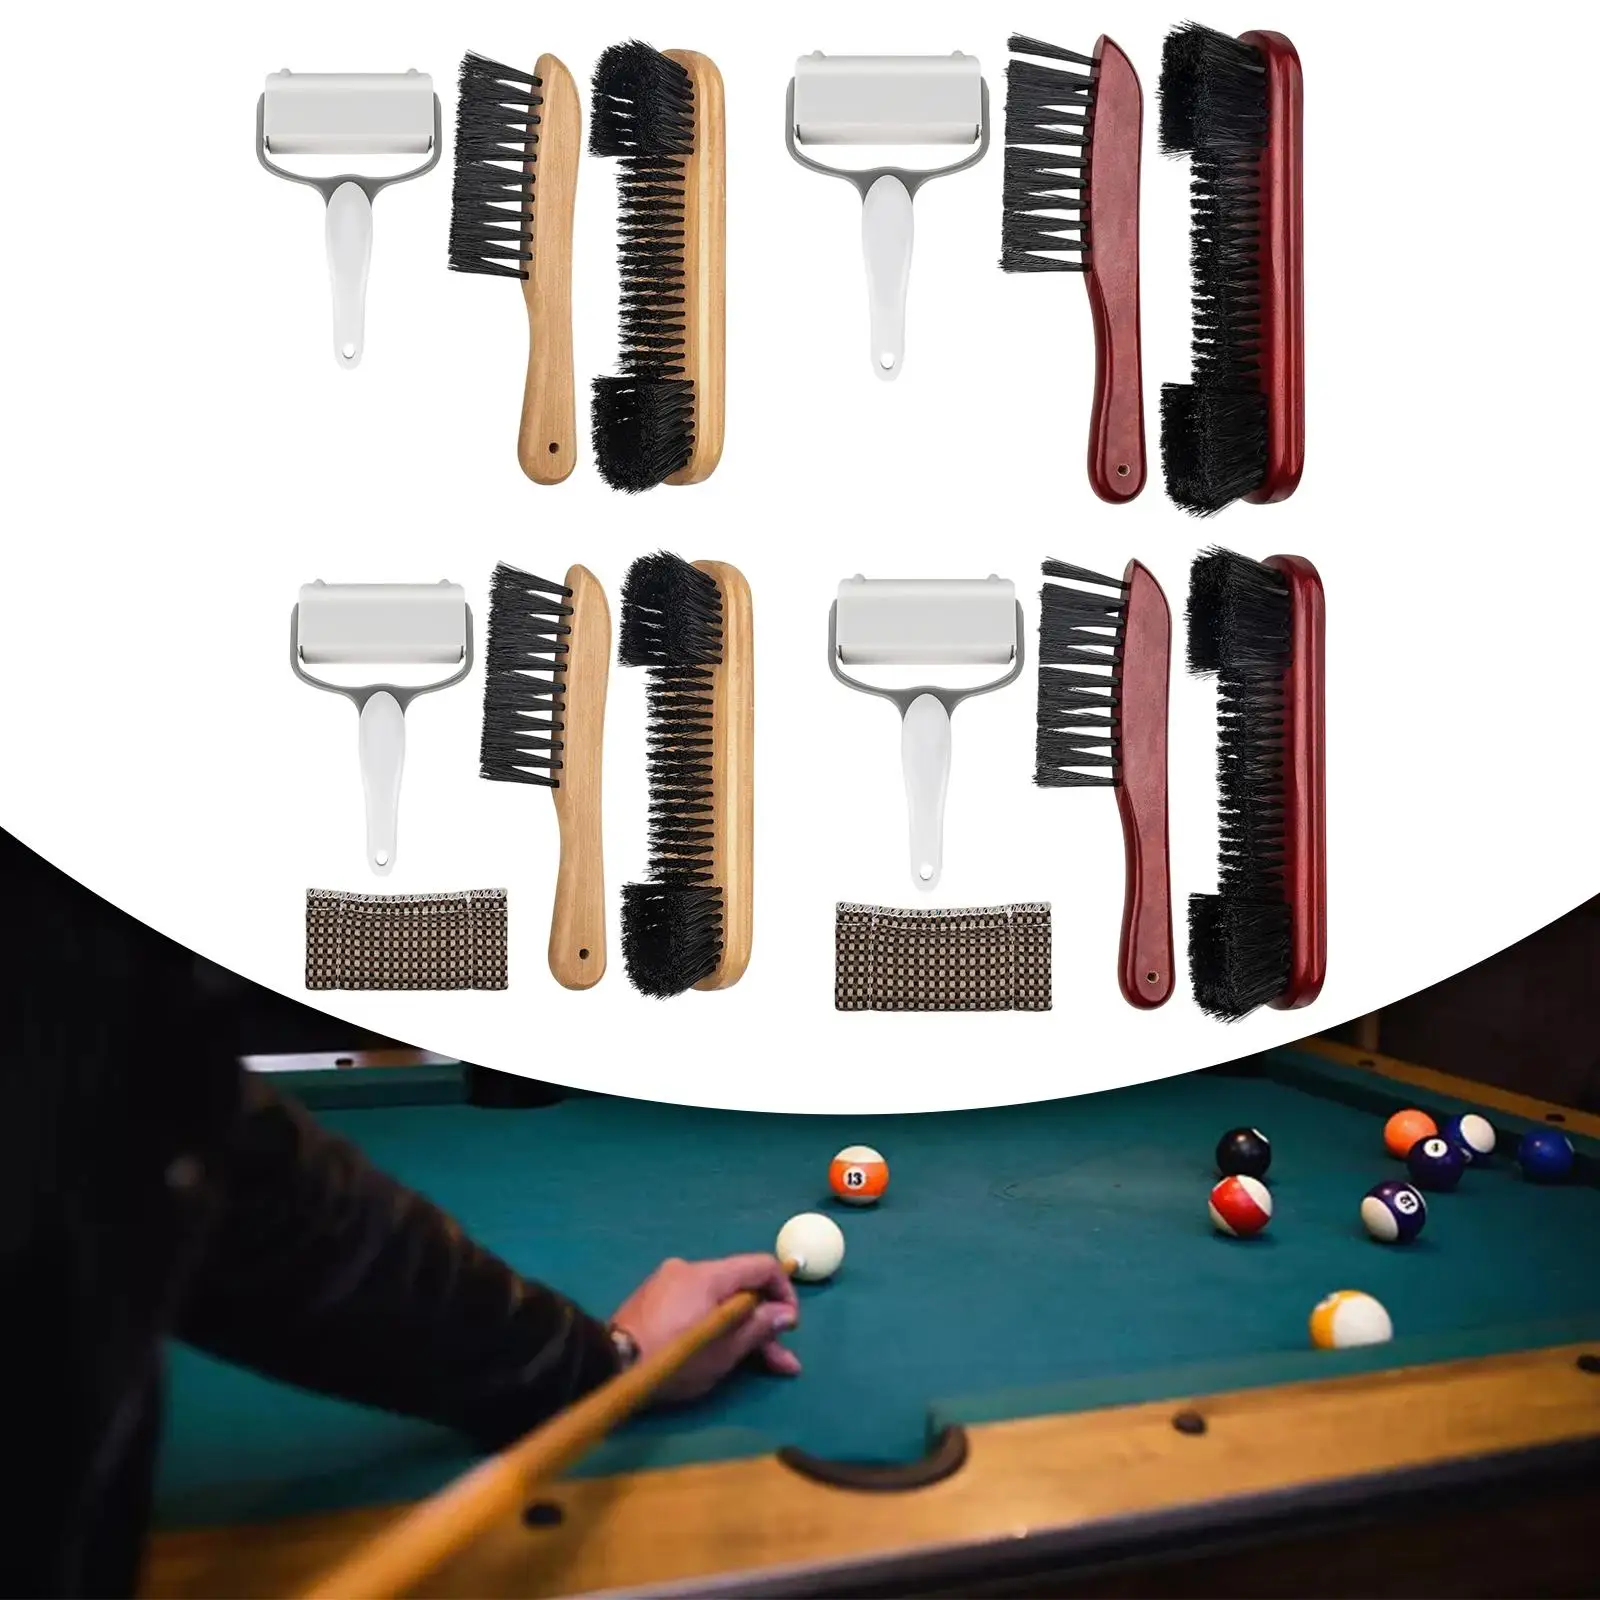 Wooden Billiards Pool Table Brush Rail Brush Set Snooker Table Brushes Wood Handle Cleaning Brush Pool Snooker Accessories